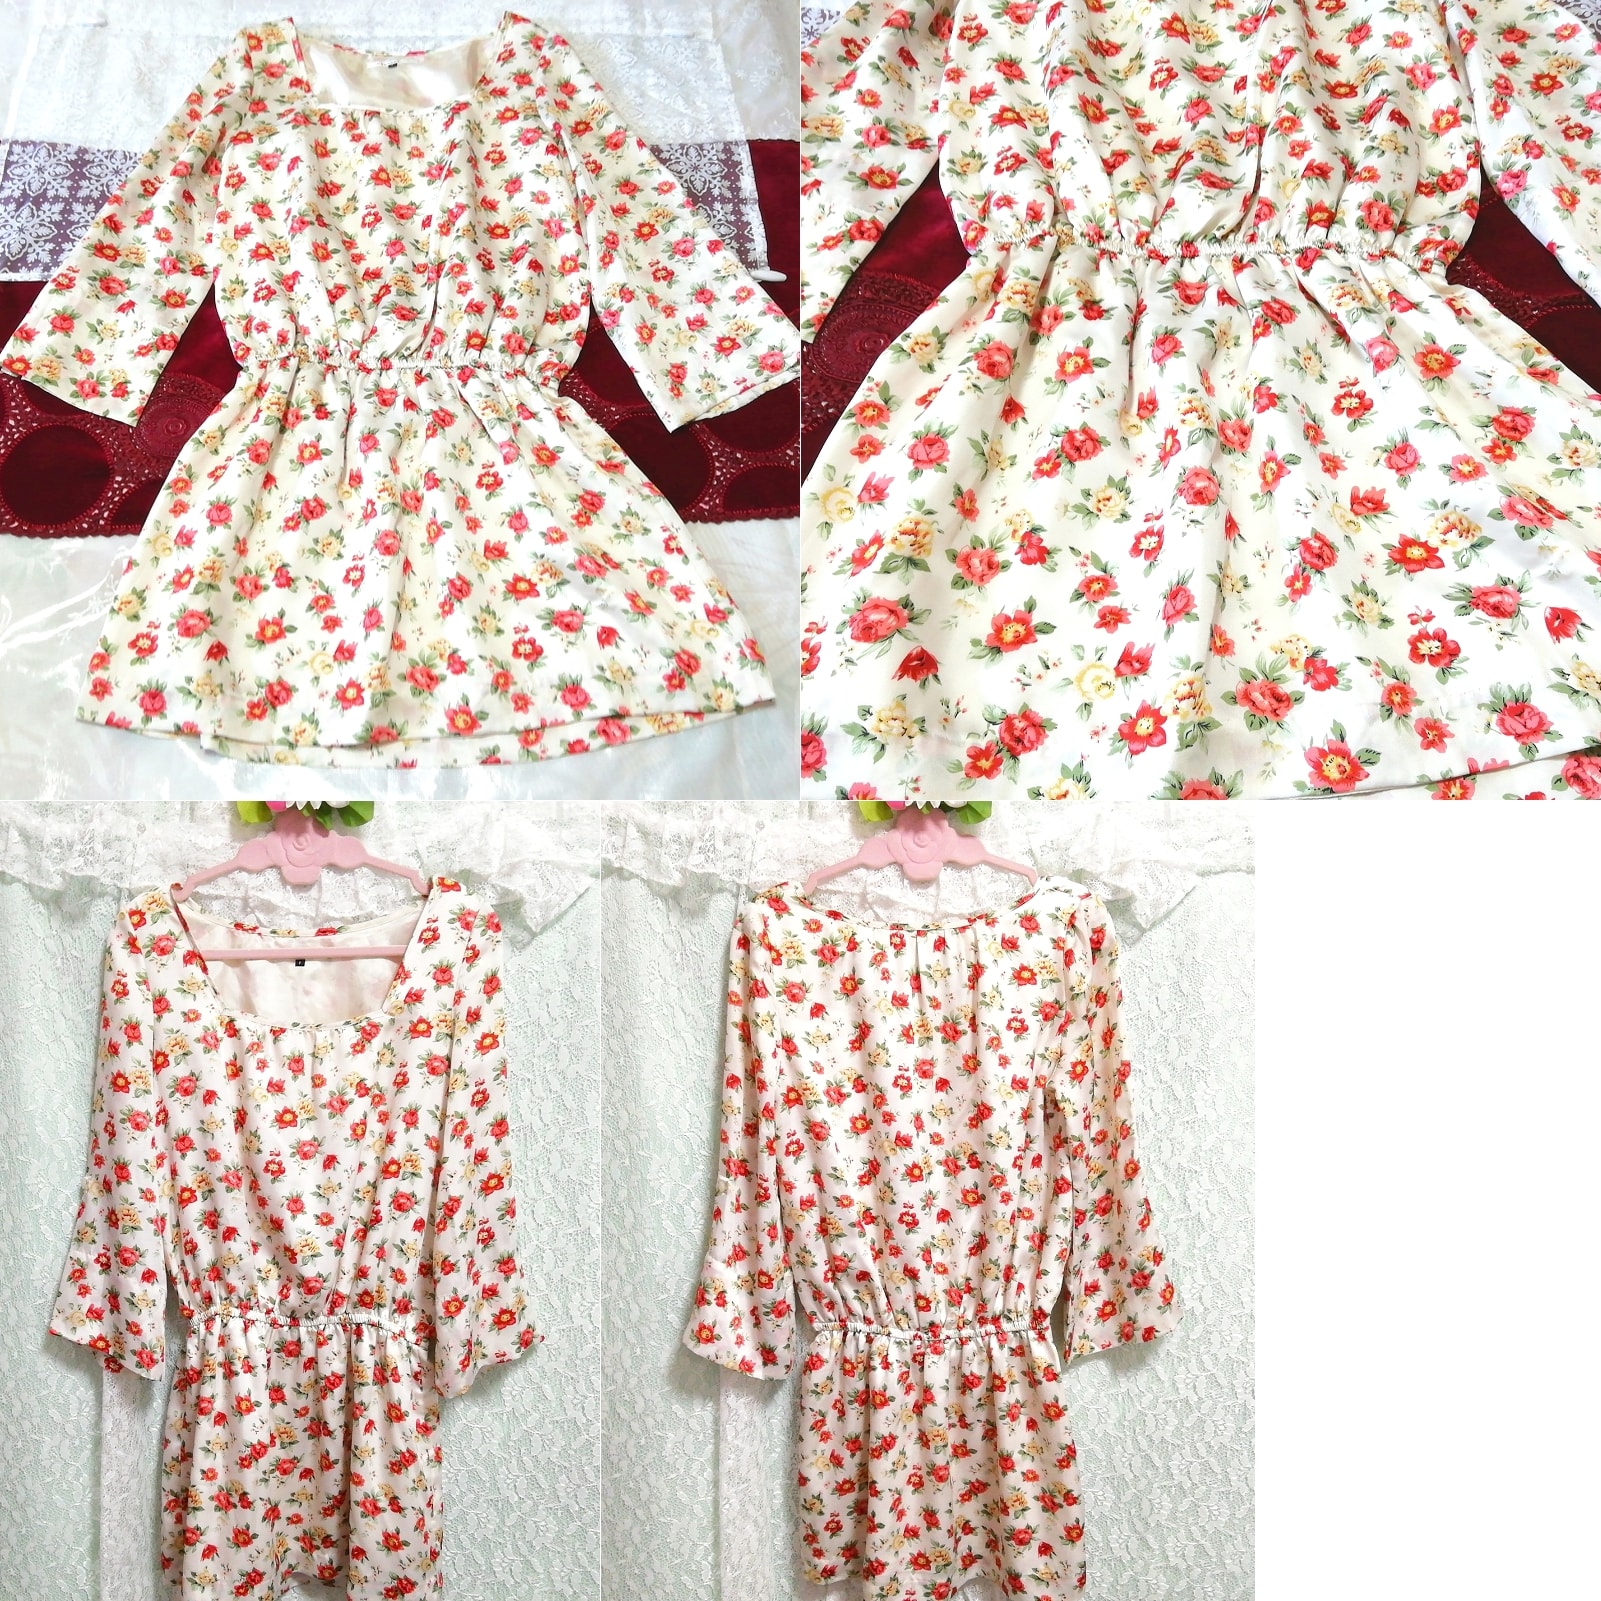 Floral white red floral pattern long sleeve tunic negligee nightgown nightwear dress, tunic, long sleeve, m size